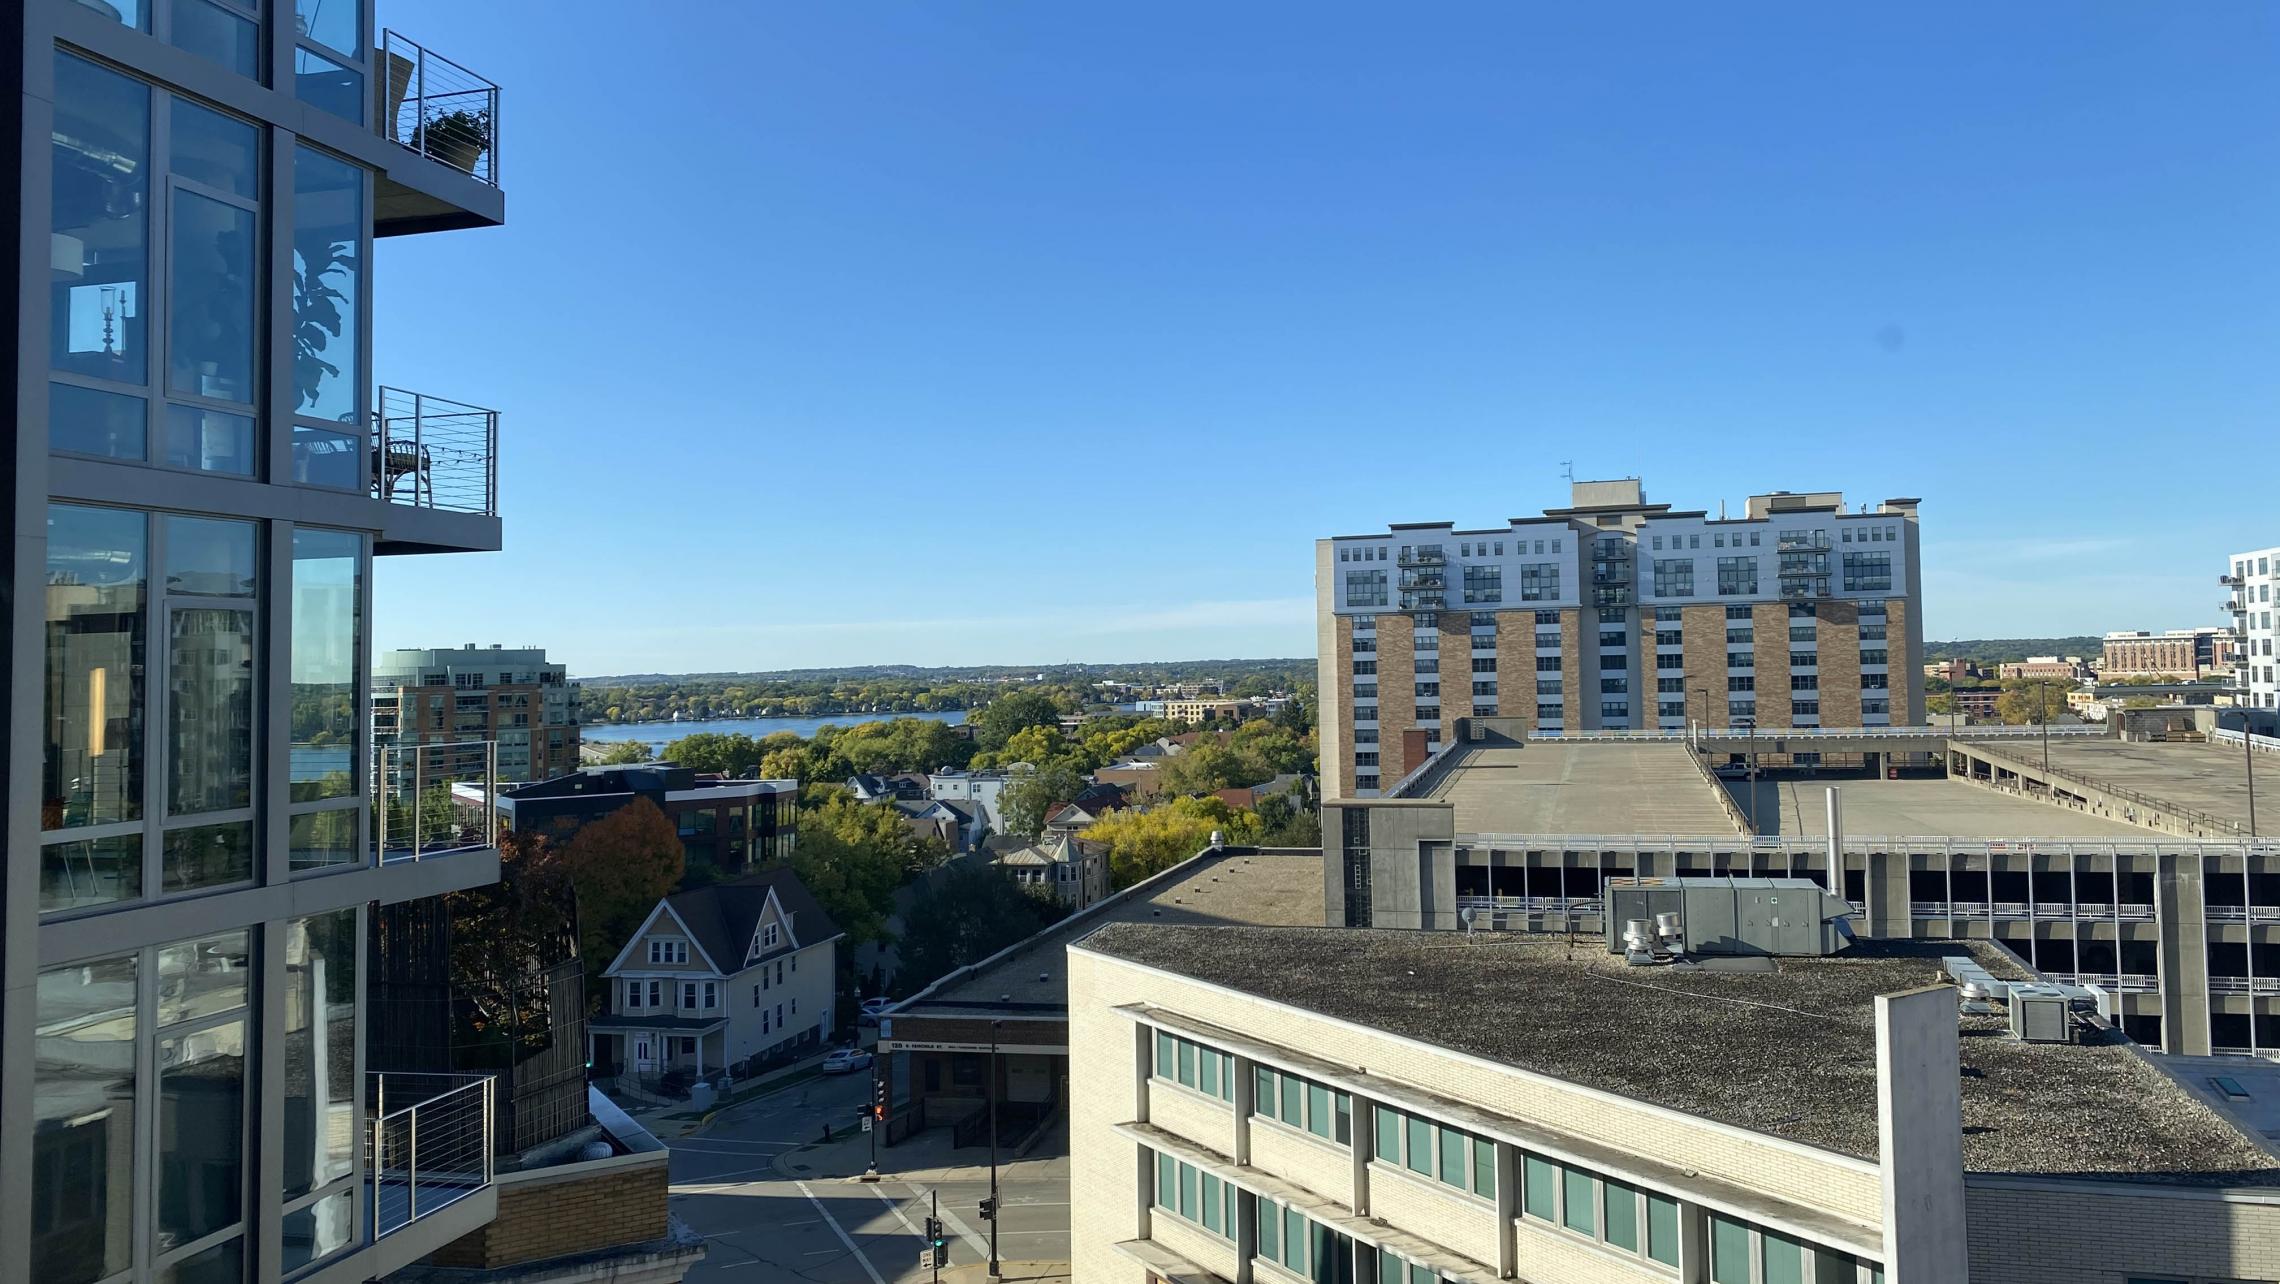 The-Pressman-Apartment-602-Two-Bedroom-Two-Bath-Kitchen-Living-Upscale-Luxurious-Modern-Exposed-Duct-Concrete-Capitol-Square-Downtown-Views-Madison-Balcony-Terrace-Pets-Fitness-Lounge-Grill-Lifestyle